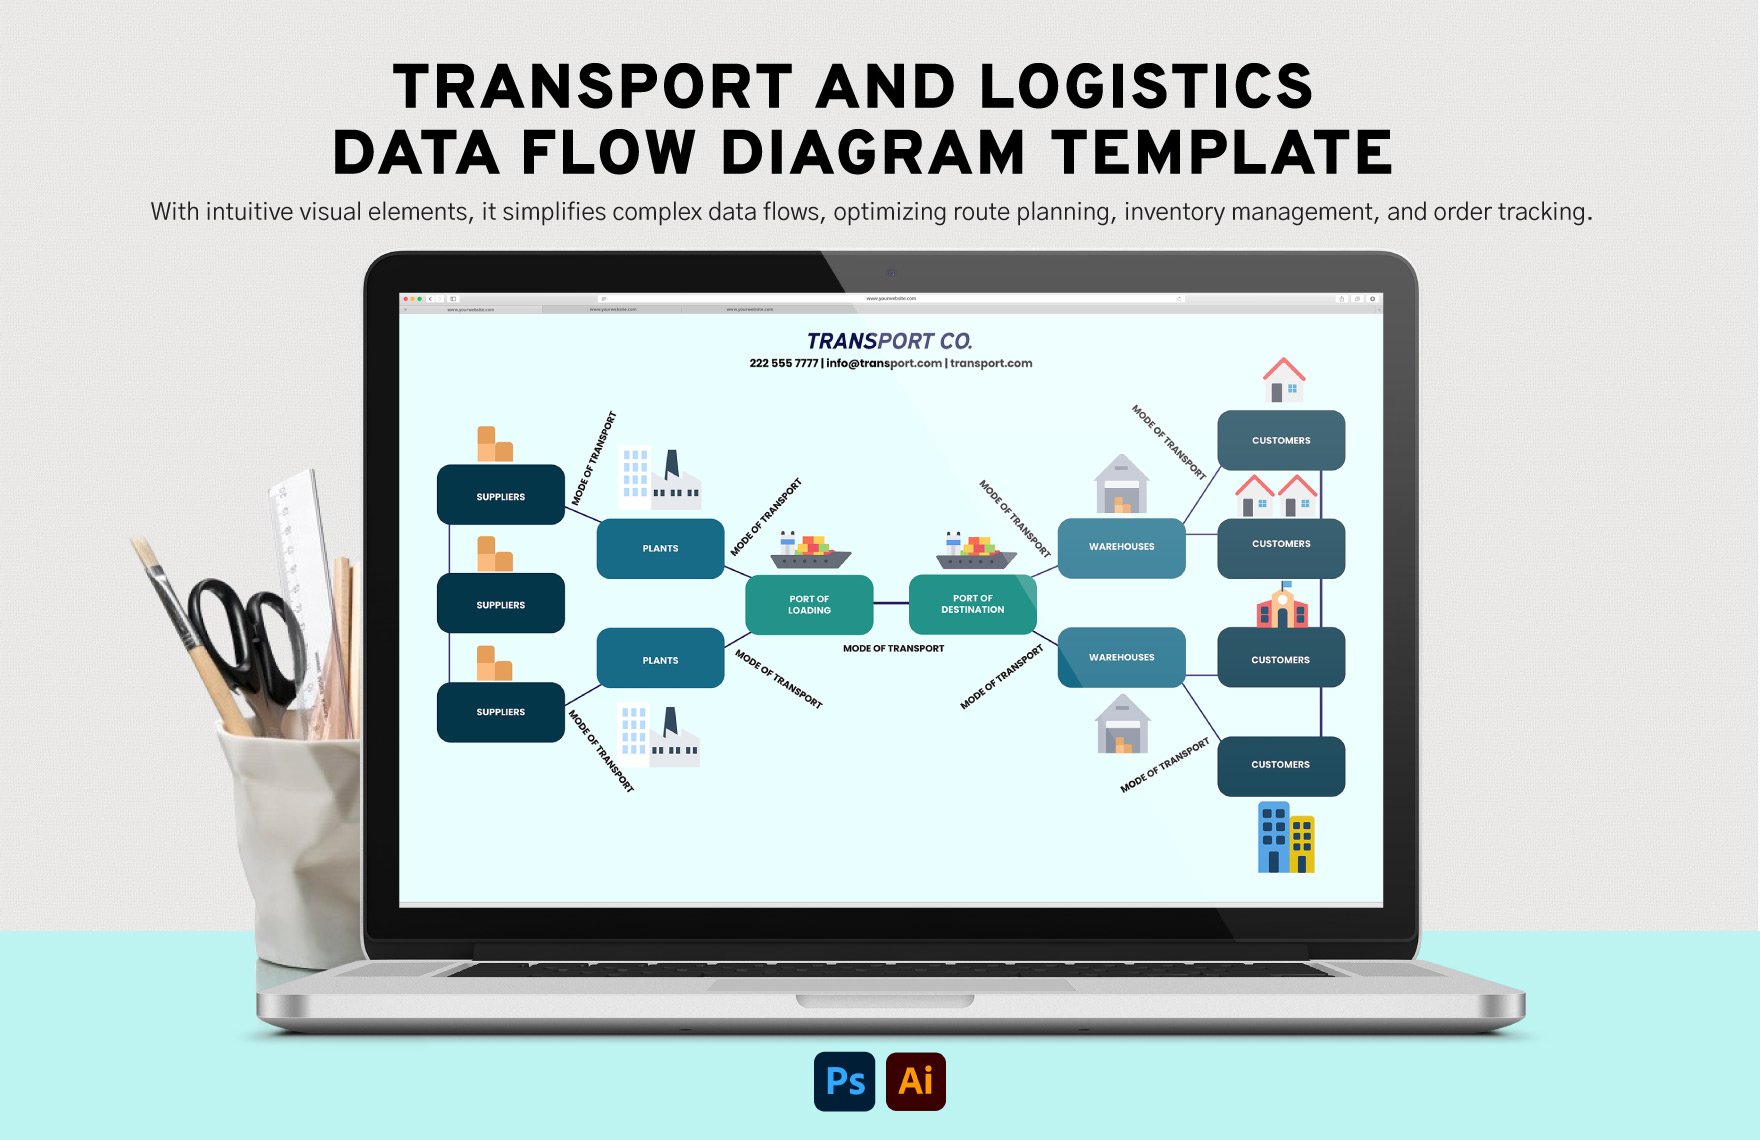 Transport and Logistics Network Diagram Template in Illustrator, PSD